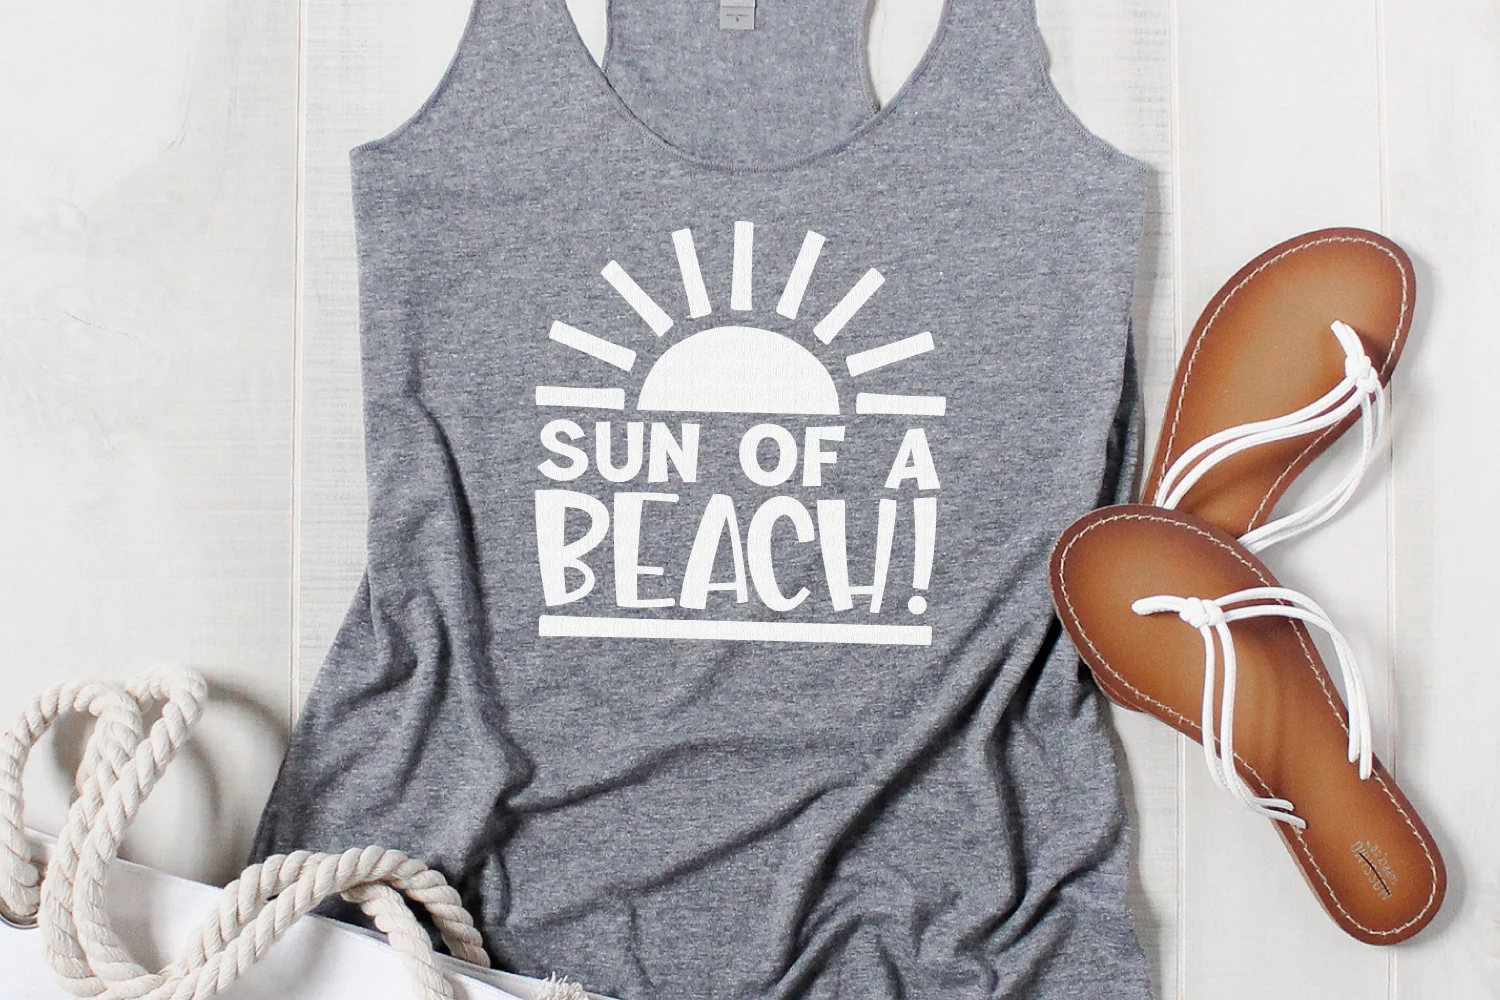 A gray tank top that says "Sun of a Beach" on the front in white vinyl. Sandals and a boat rope lay nearby.